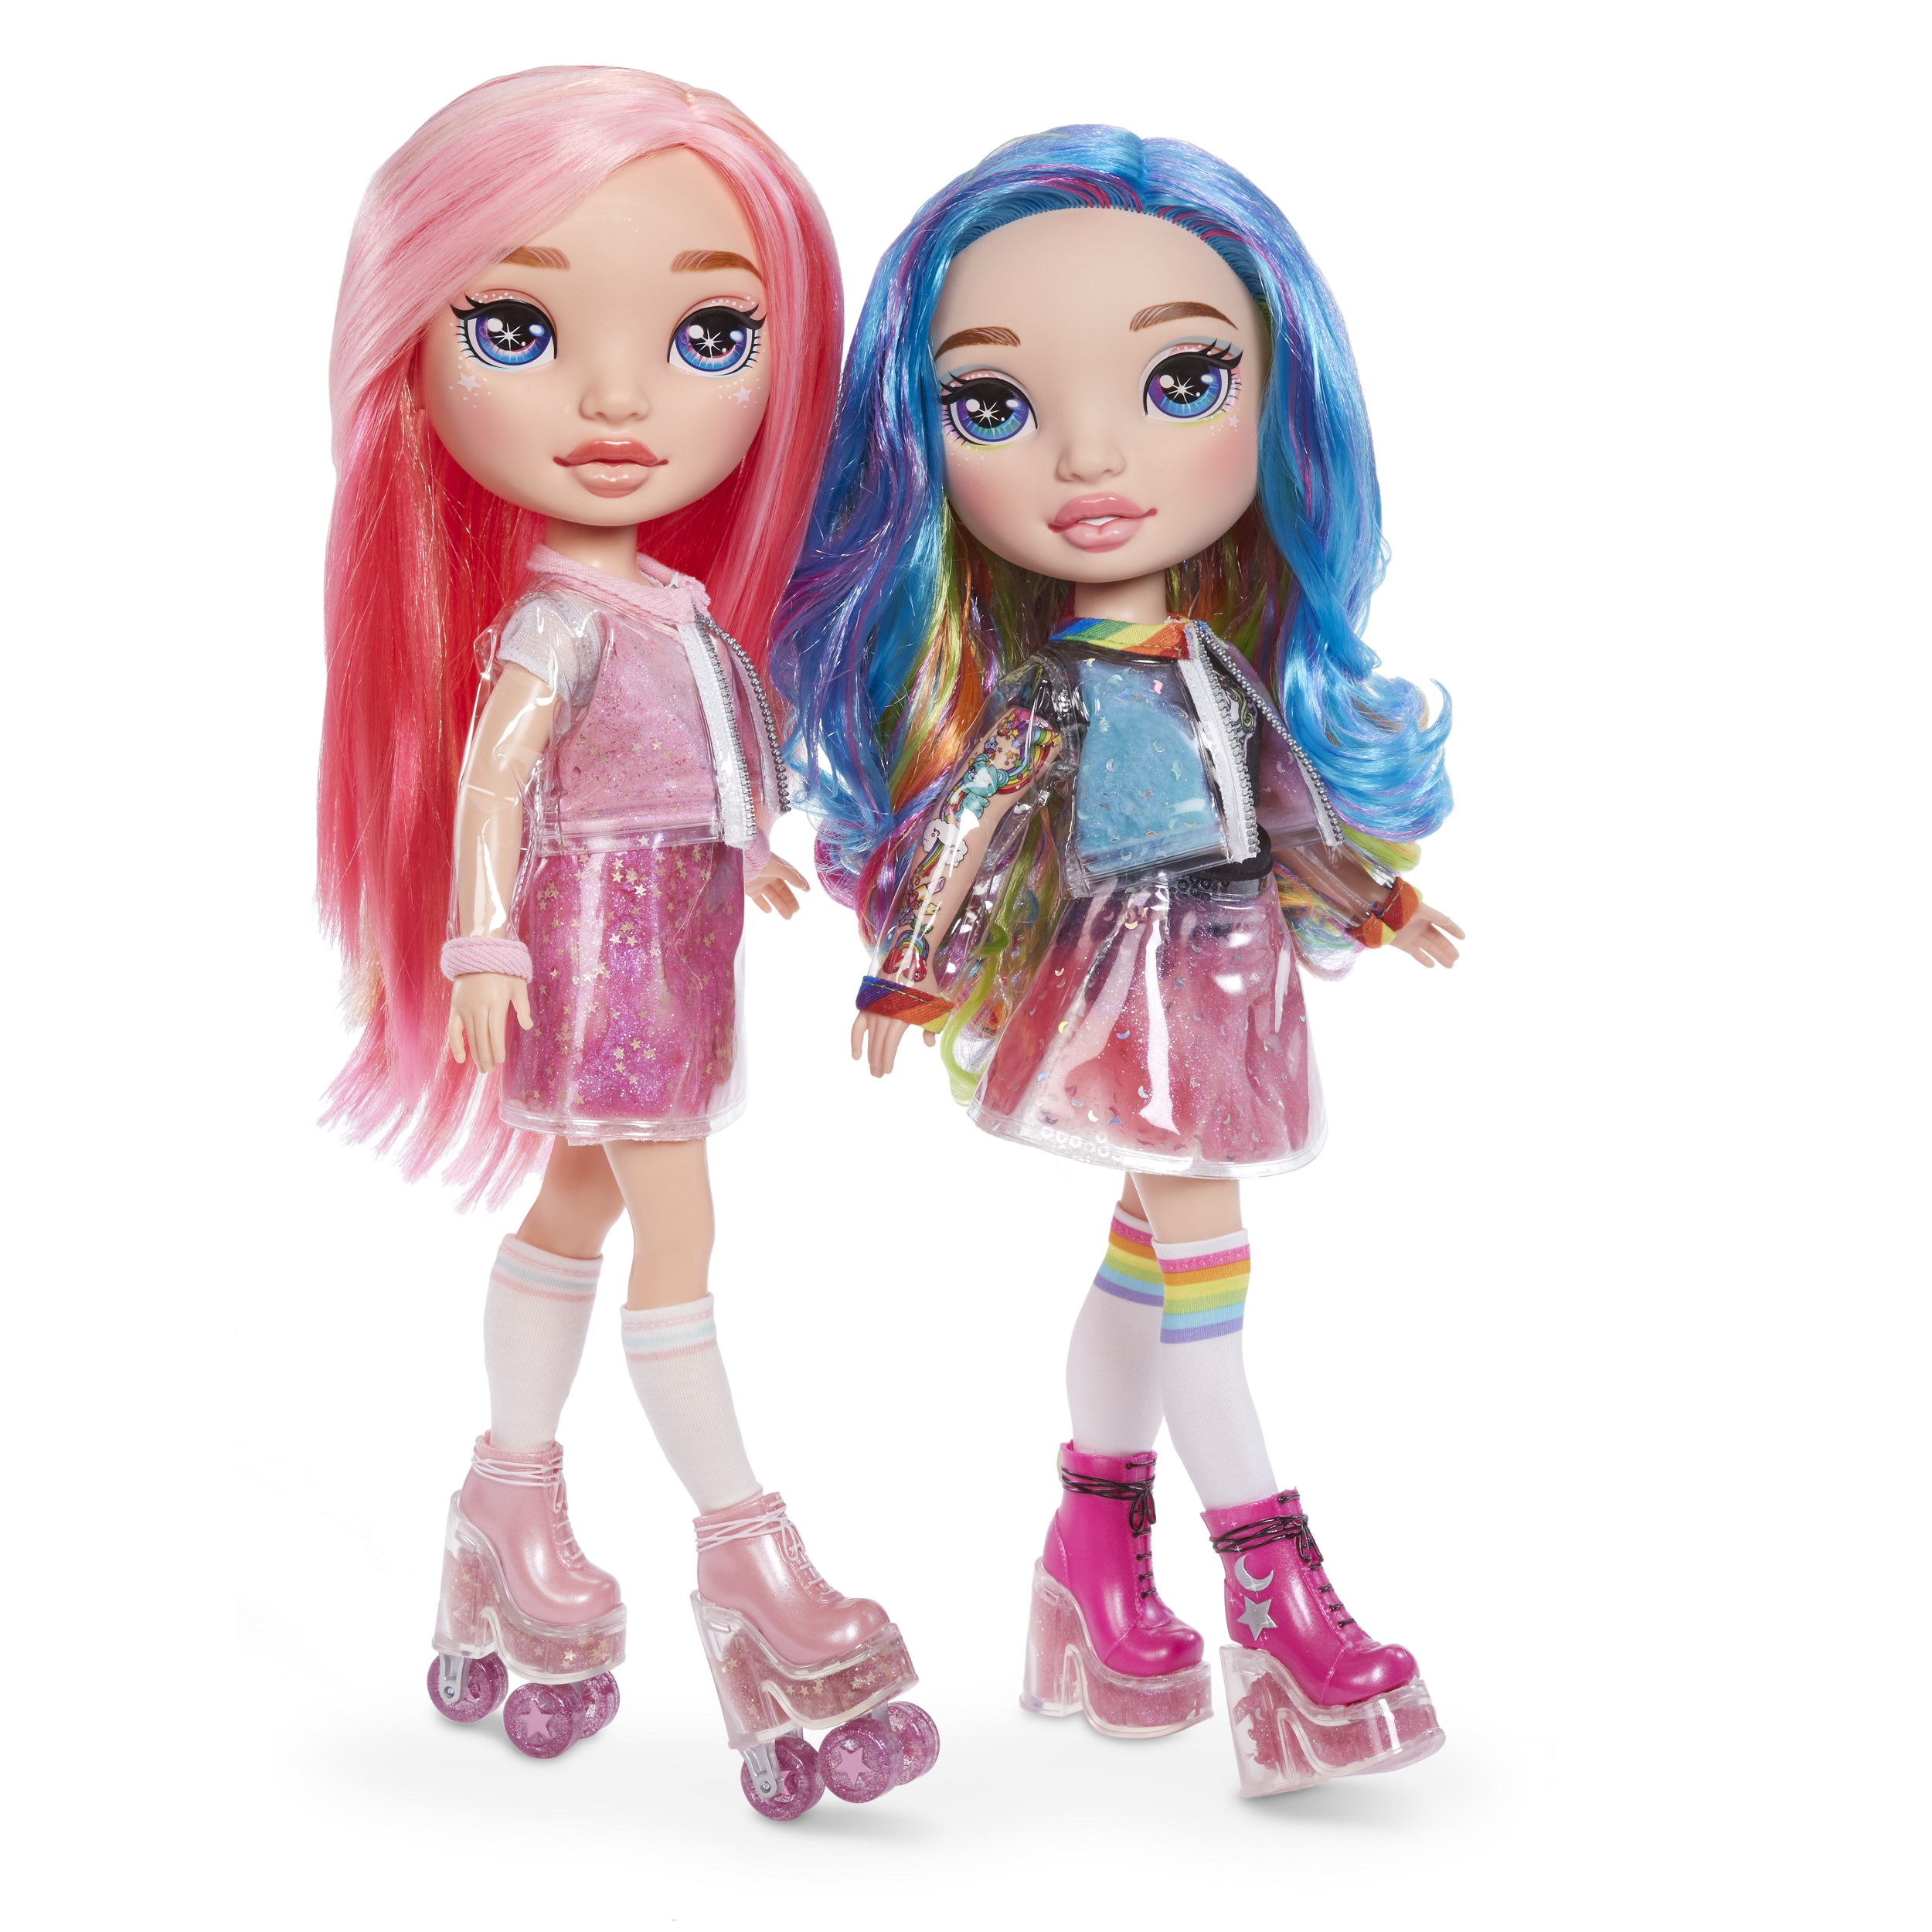 Rainbow Surprise by Poopsie: 14" Doll with 20+ Slime & Fashion Surprises, Rainbow Dream or Pixie Rose - image 7 of 8